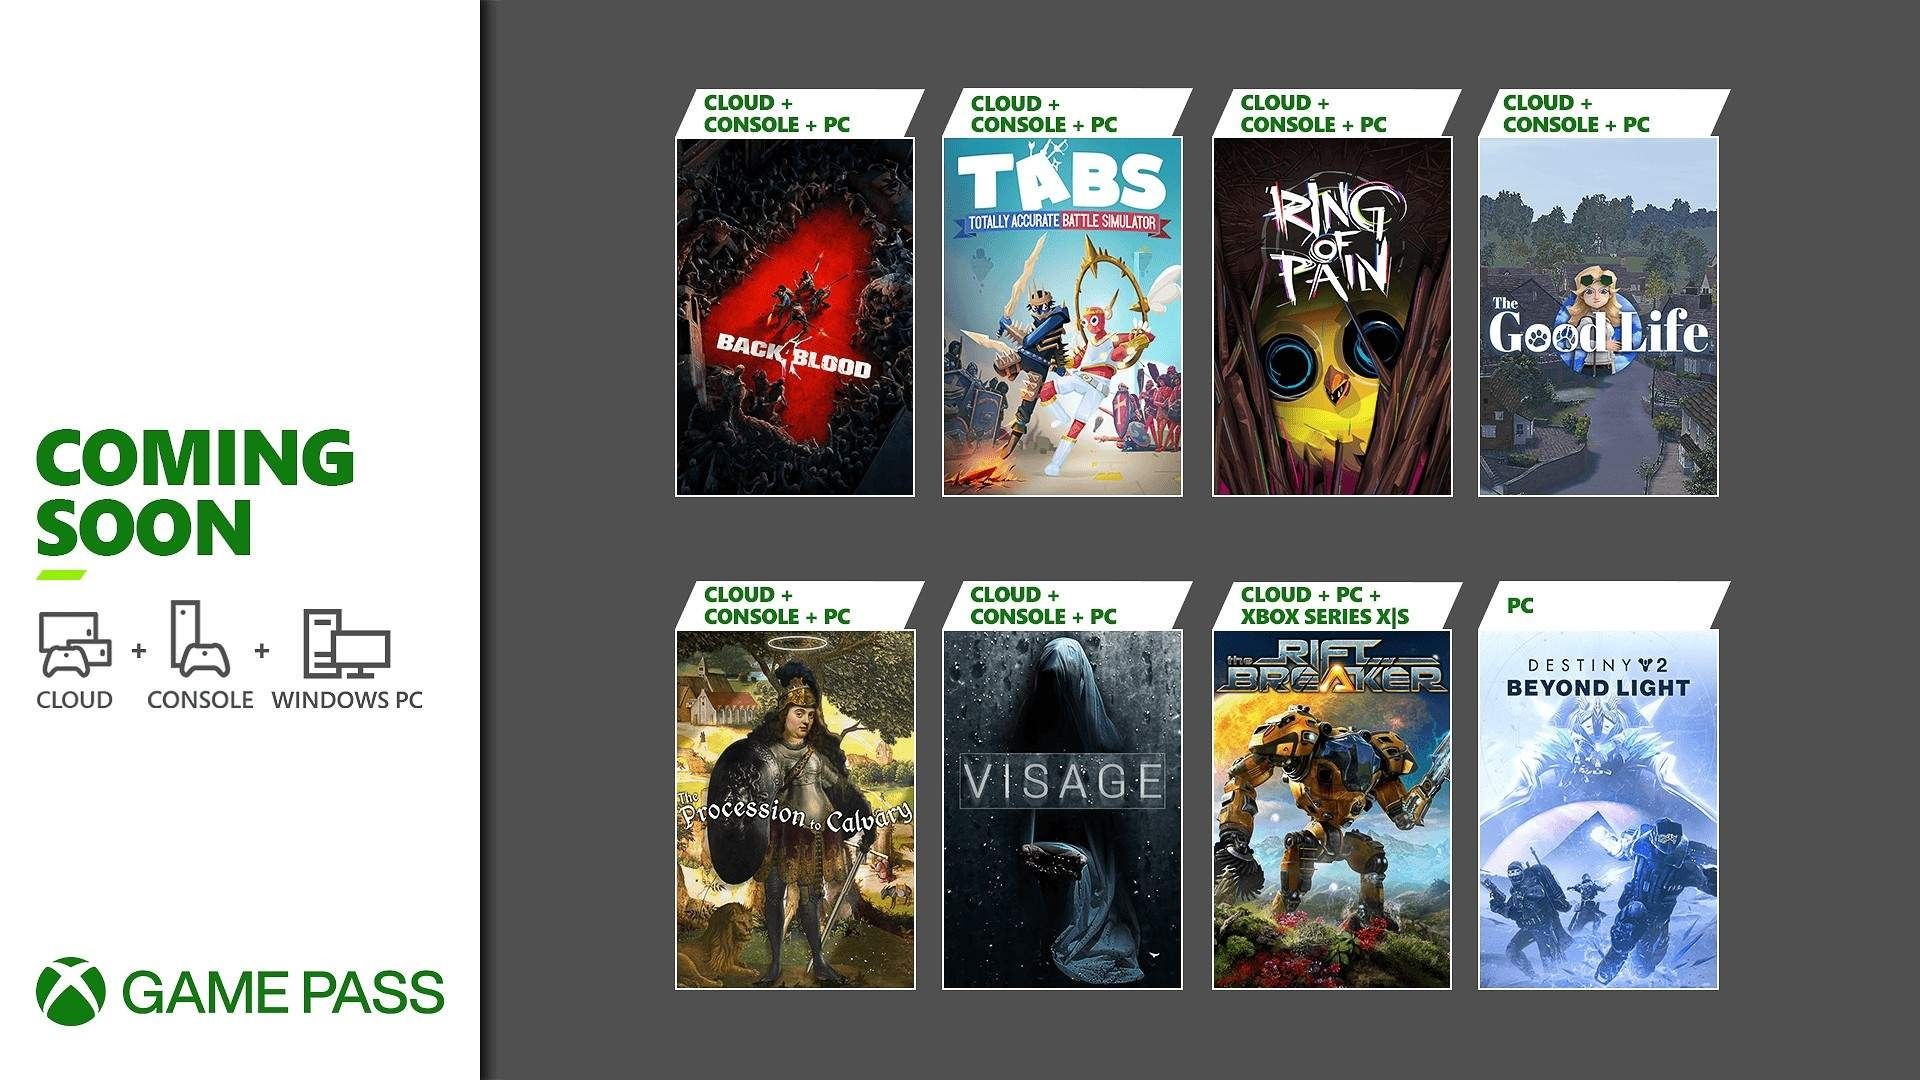 Xbox Game Pass Confirms 8 More Games Coming in October